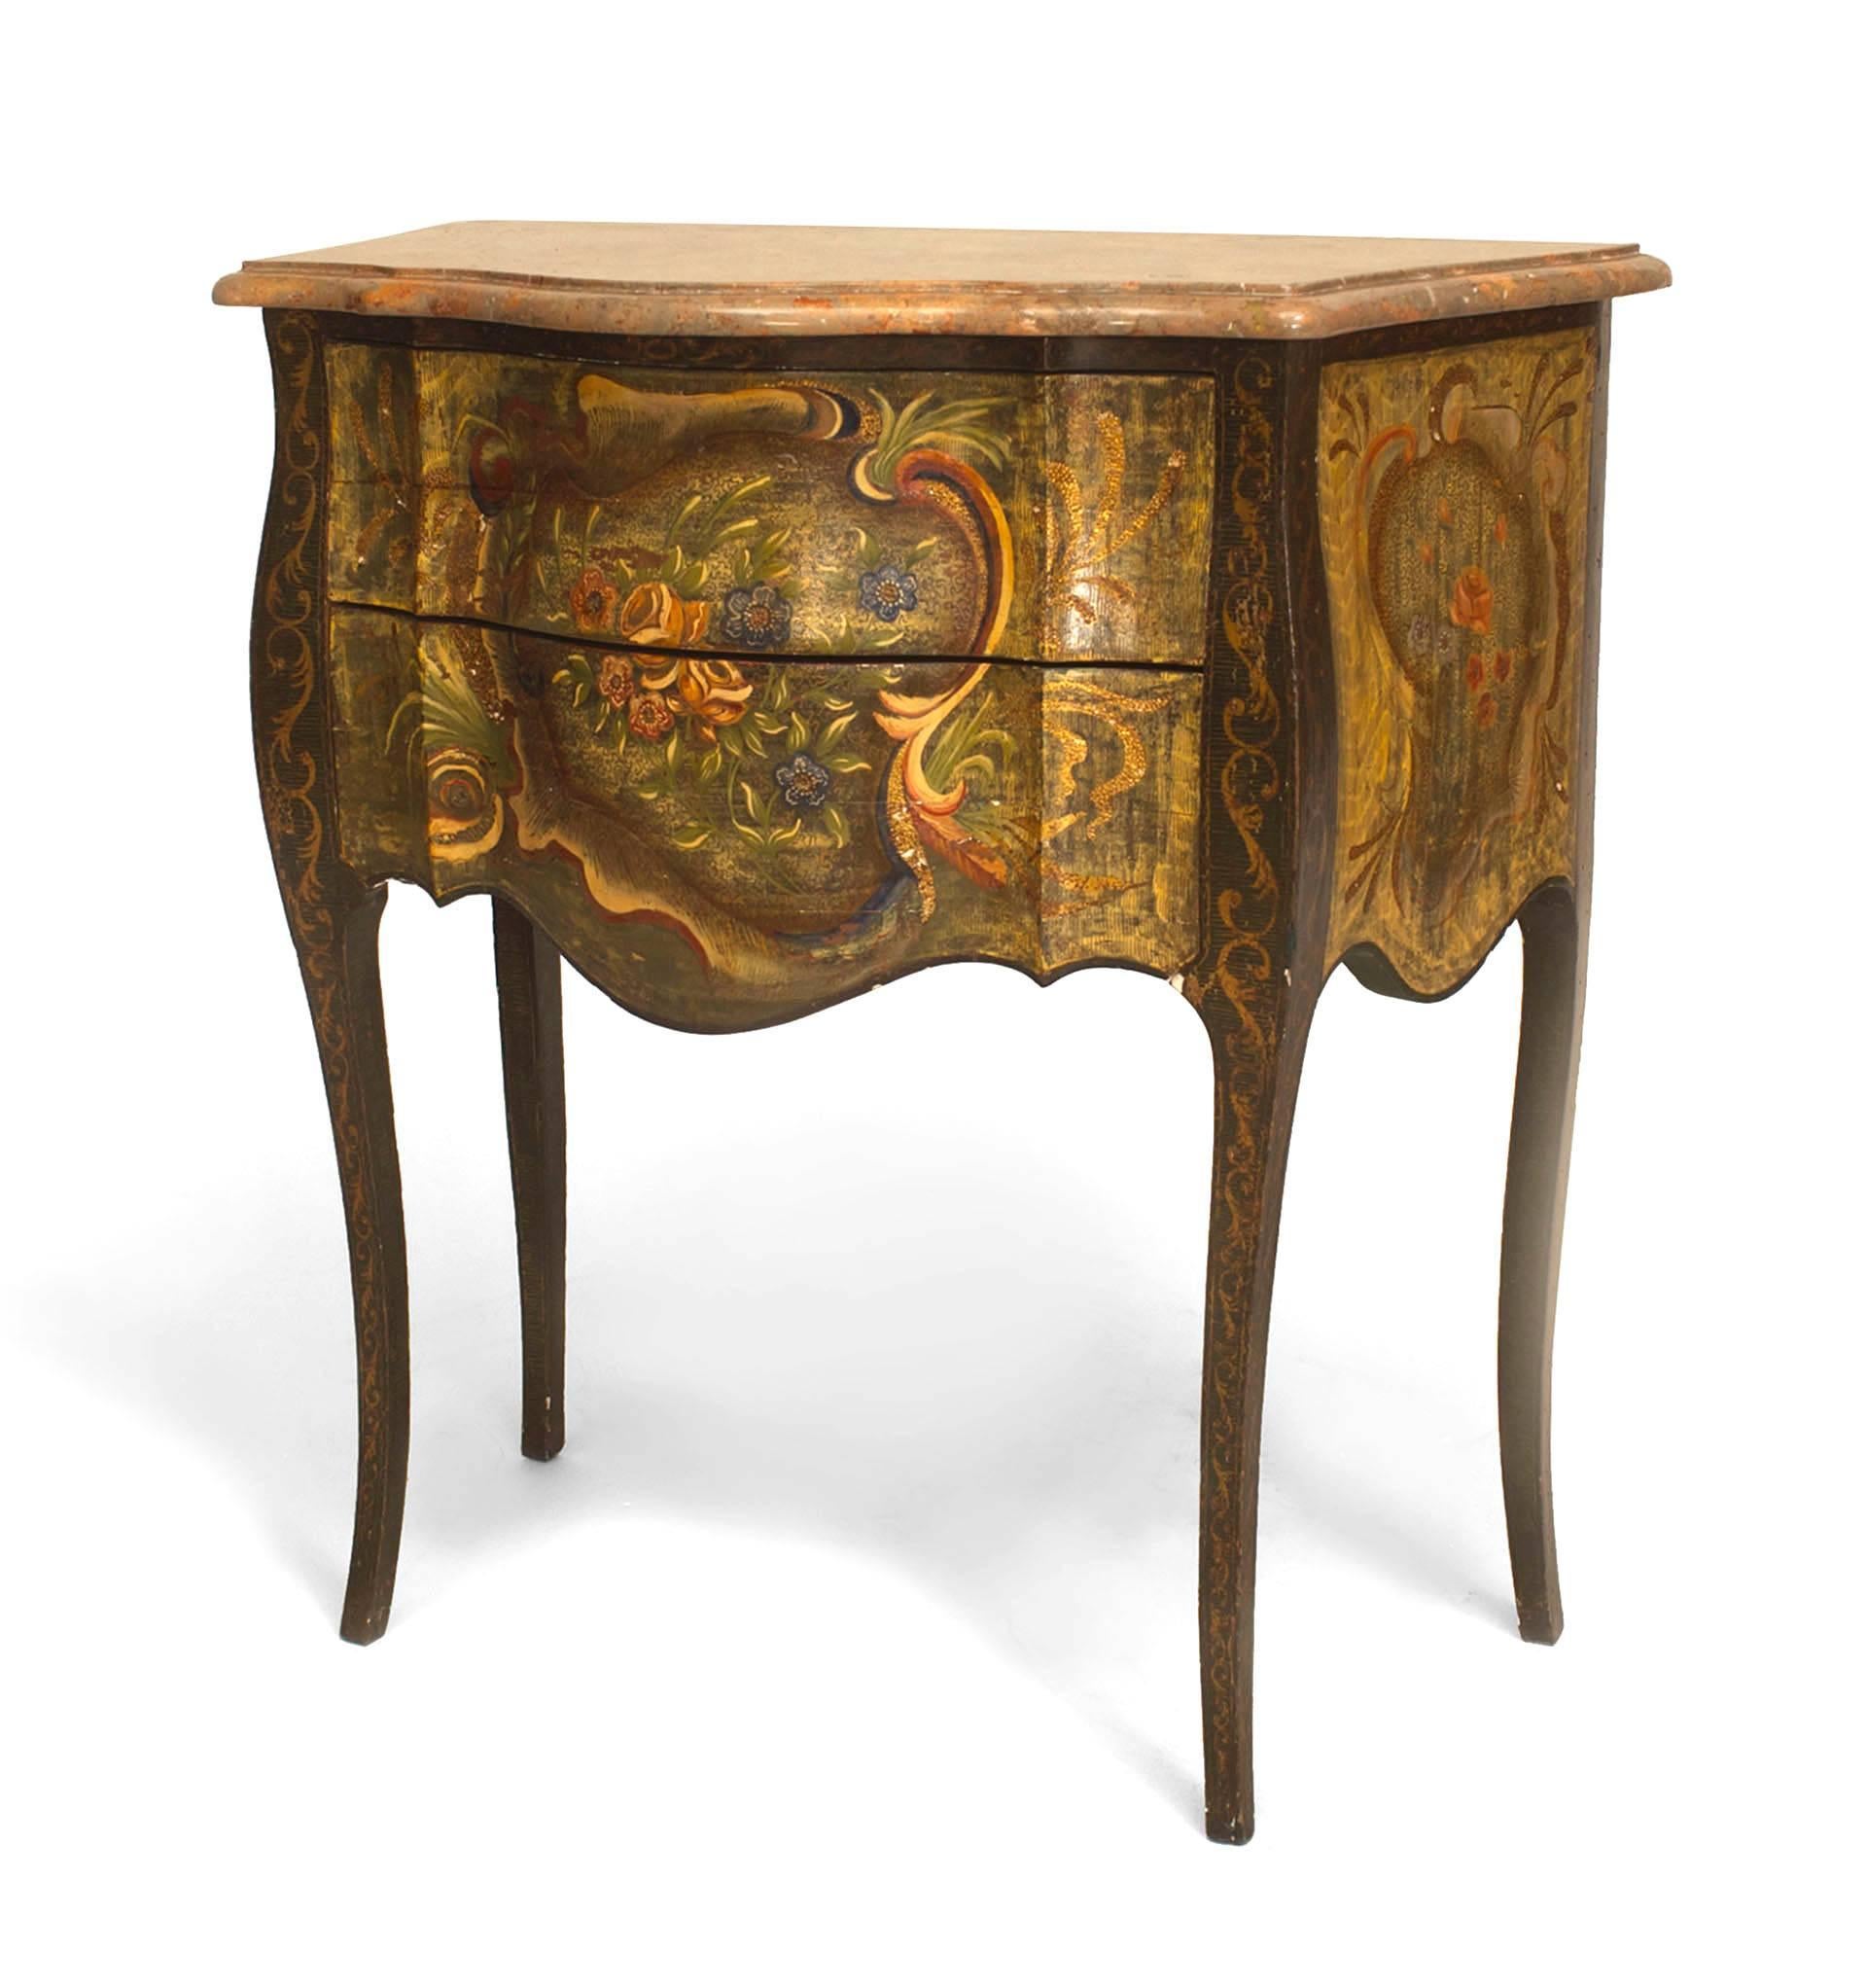 Pair of Italian Venetian (19/20th Century) floral painted and decorated 2 drawer commodes with shaped marble top (PRICED AS Pair).
